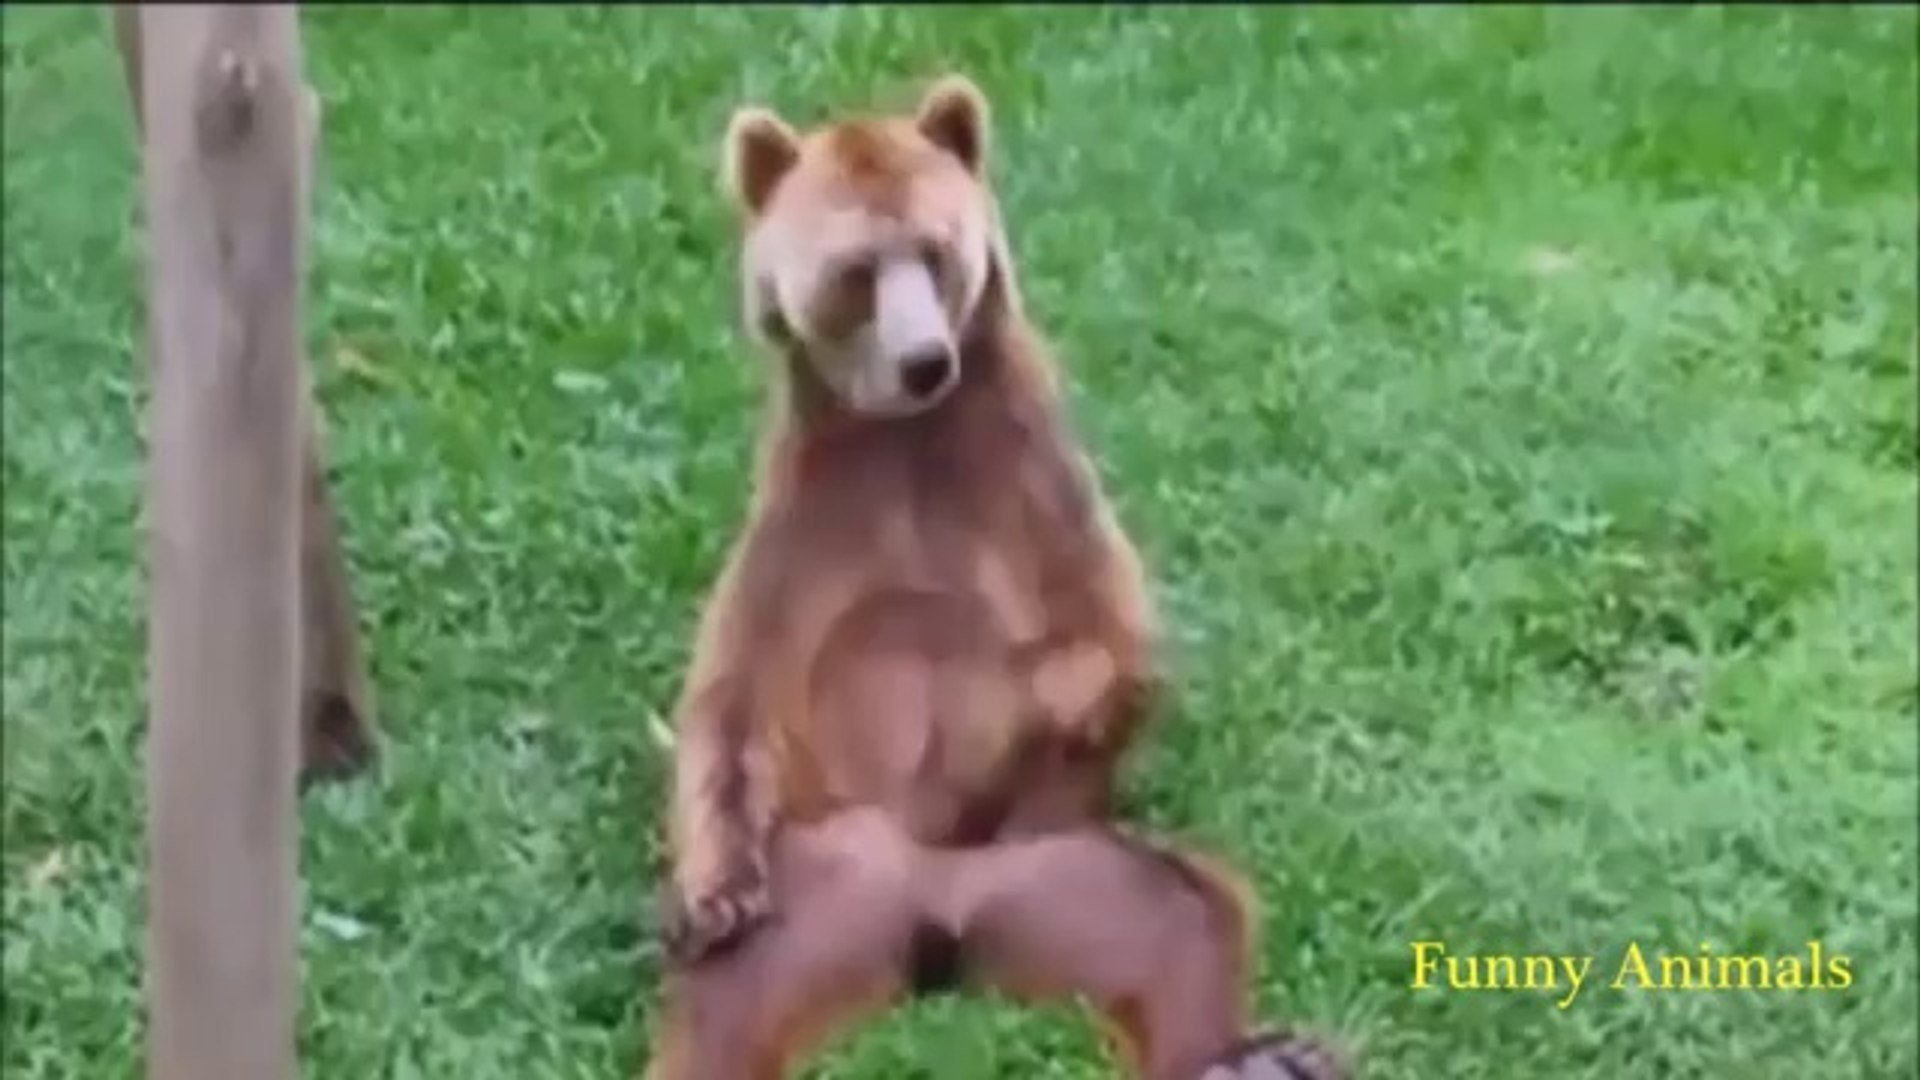 Most Funny Animals Compilation - Pets and Zoo Animals